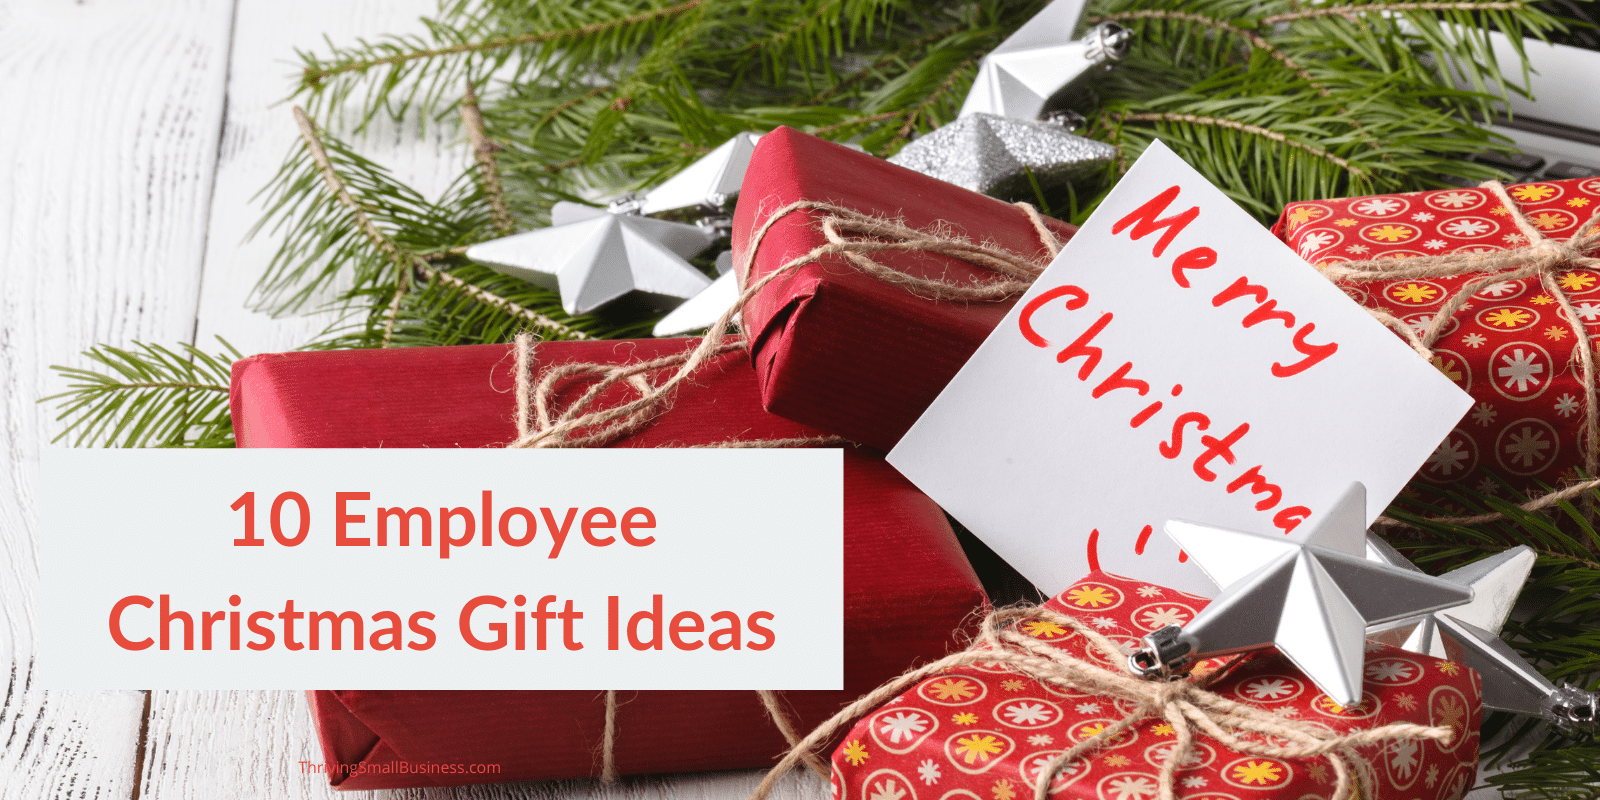 10 Employee Christmas Gift Ideas – The Thriving Small Business